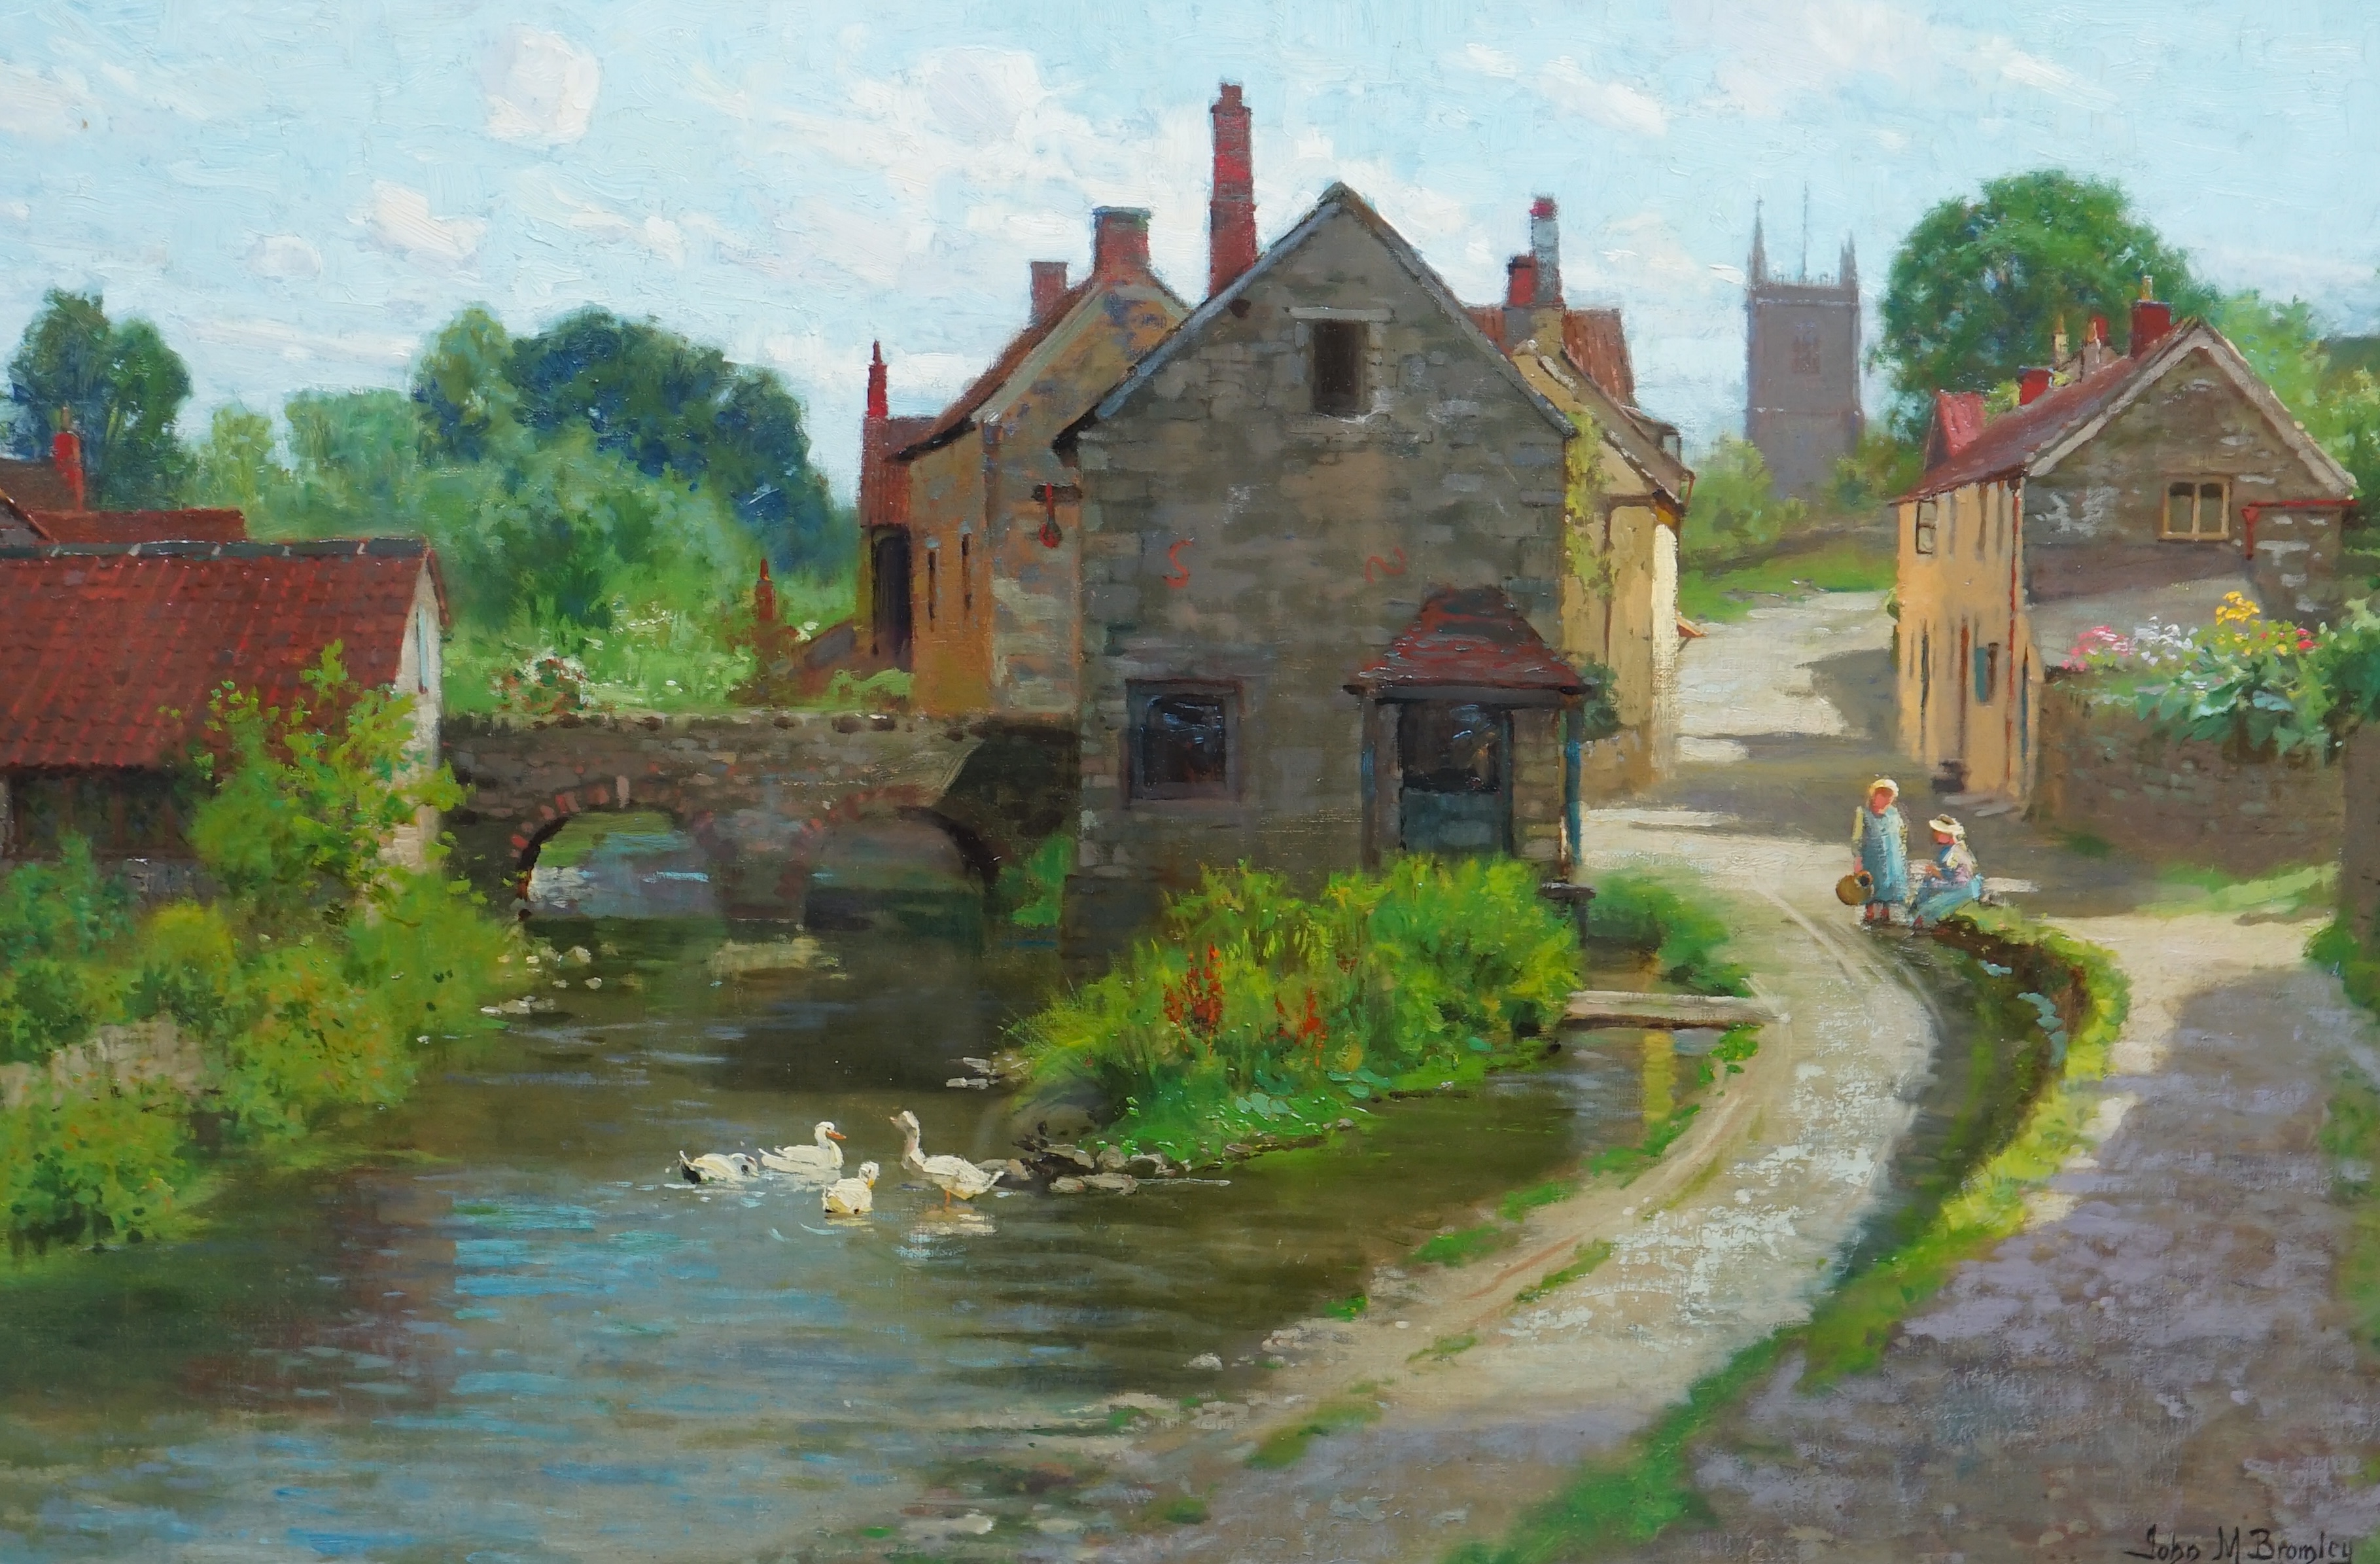 John Mallord Bromley (English, 1858-1939), Village scene with ducks on a stream, oil on canvas, 49 x 74cm